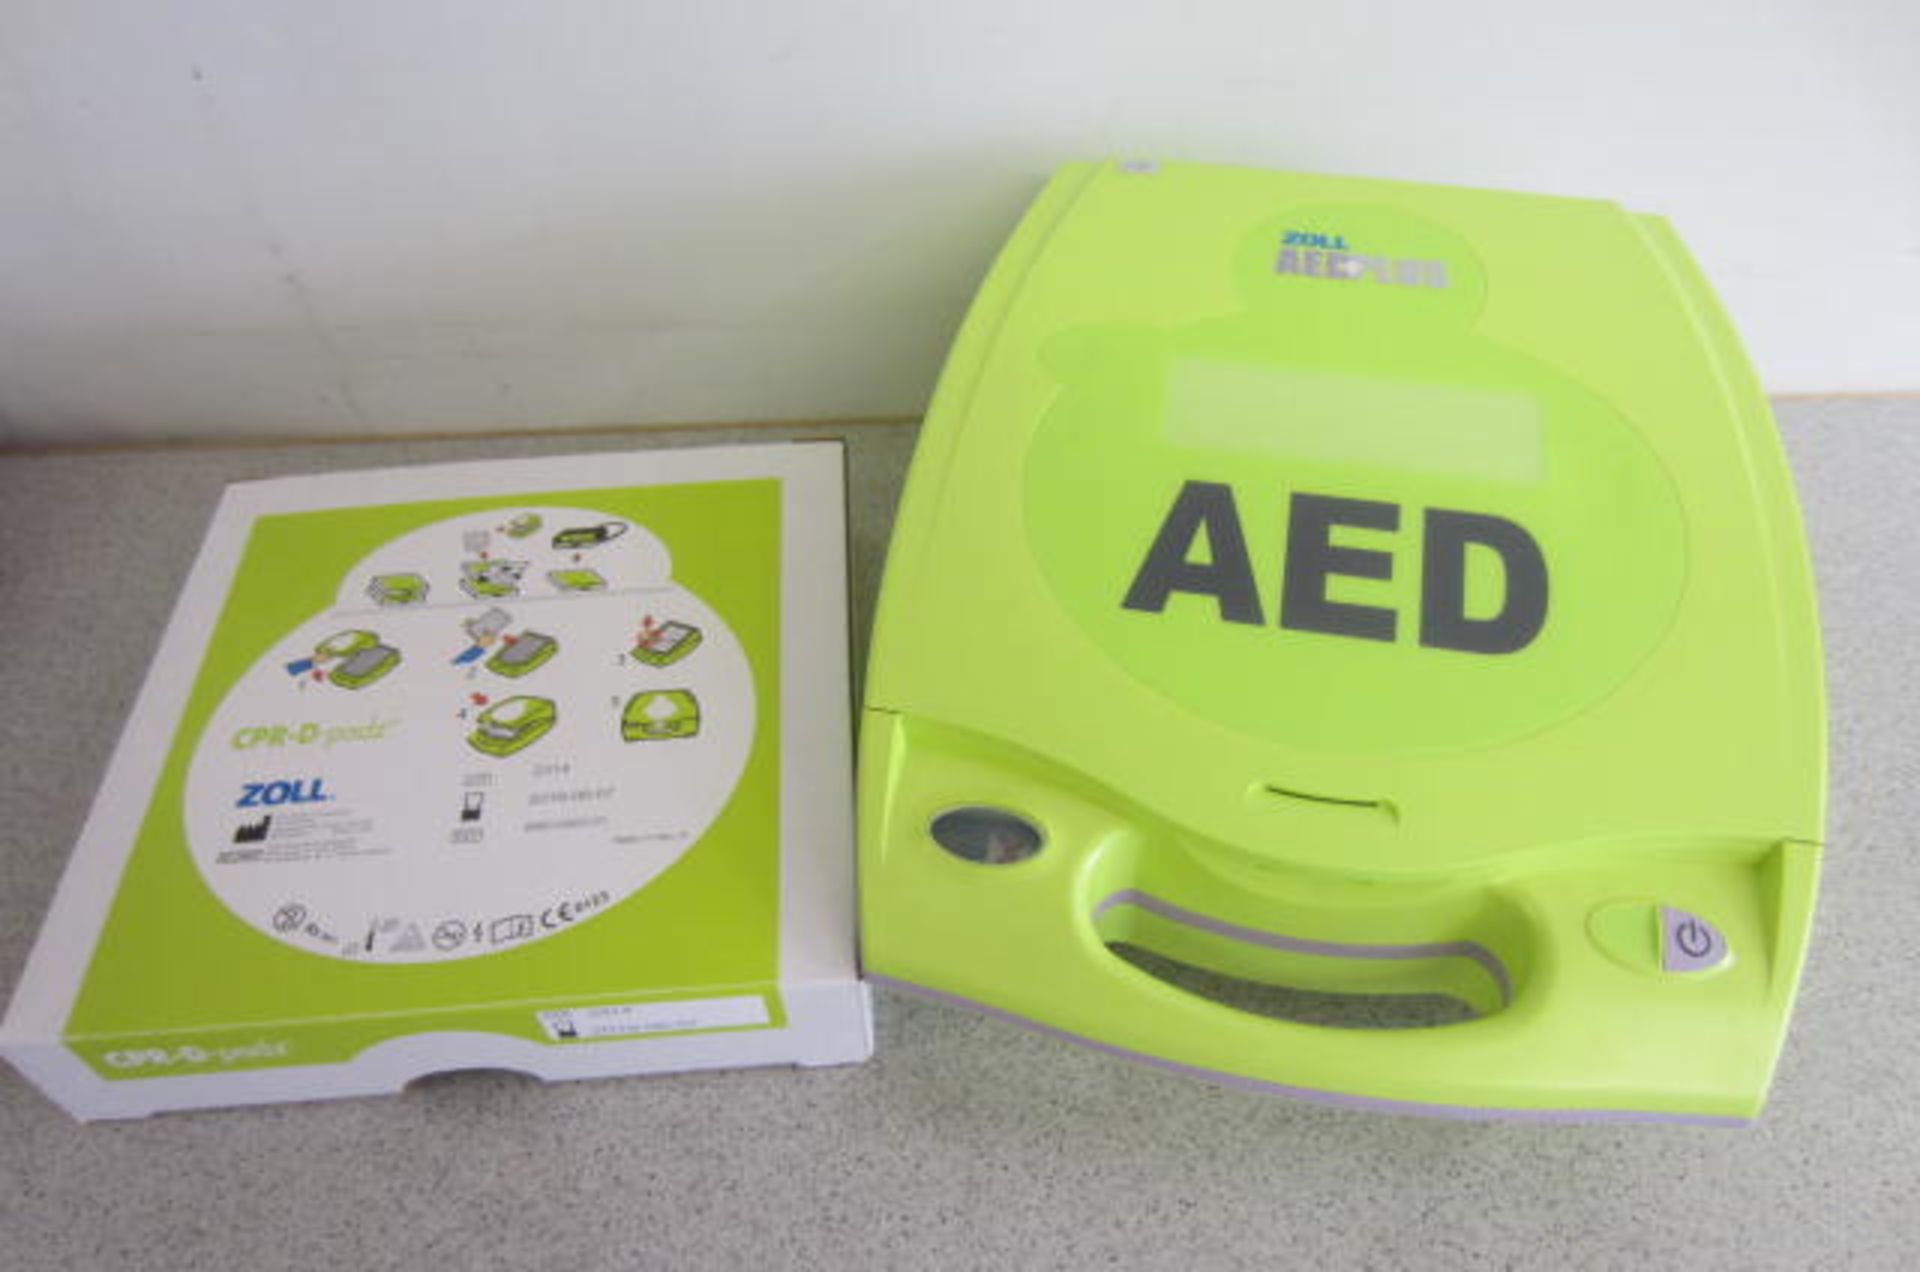 Zoll AED Plus Automated External Defibrillator. Complete In Box, Purchased September 2014 and as - Image 4 of 6